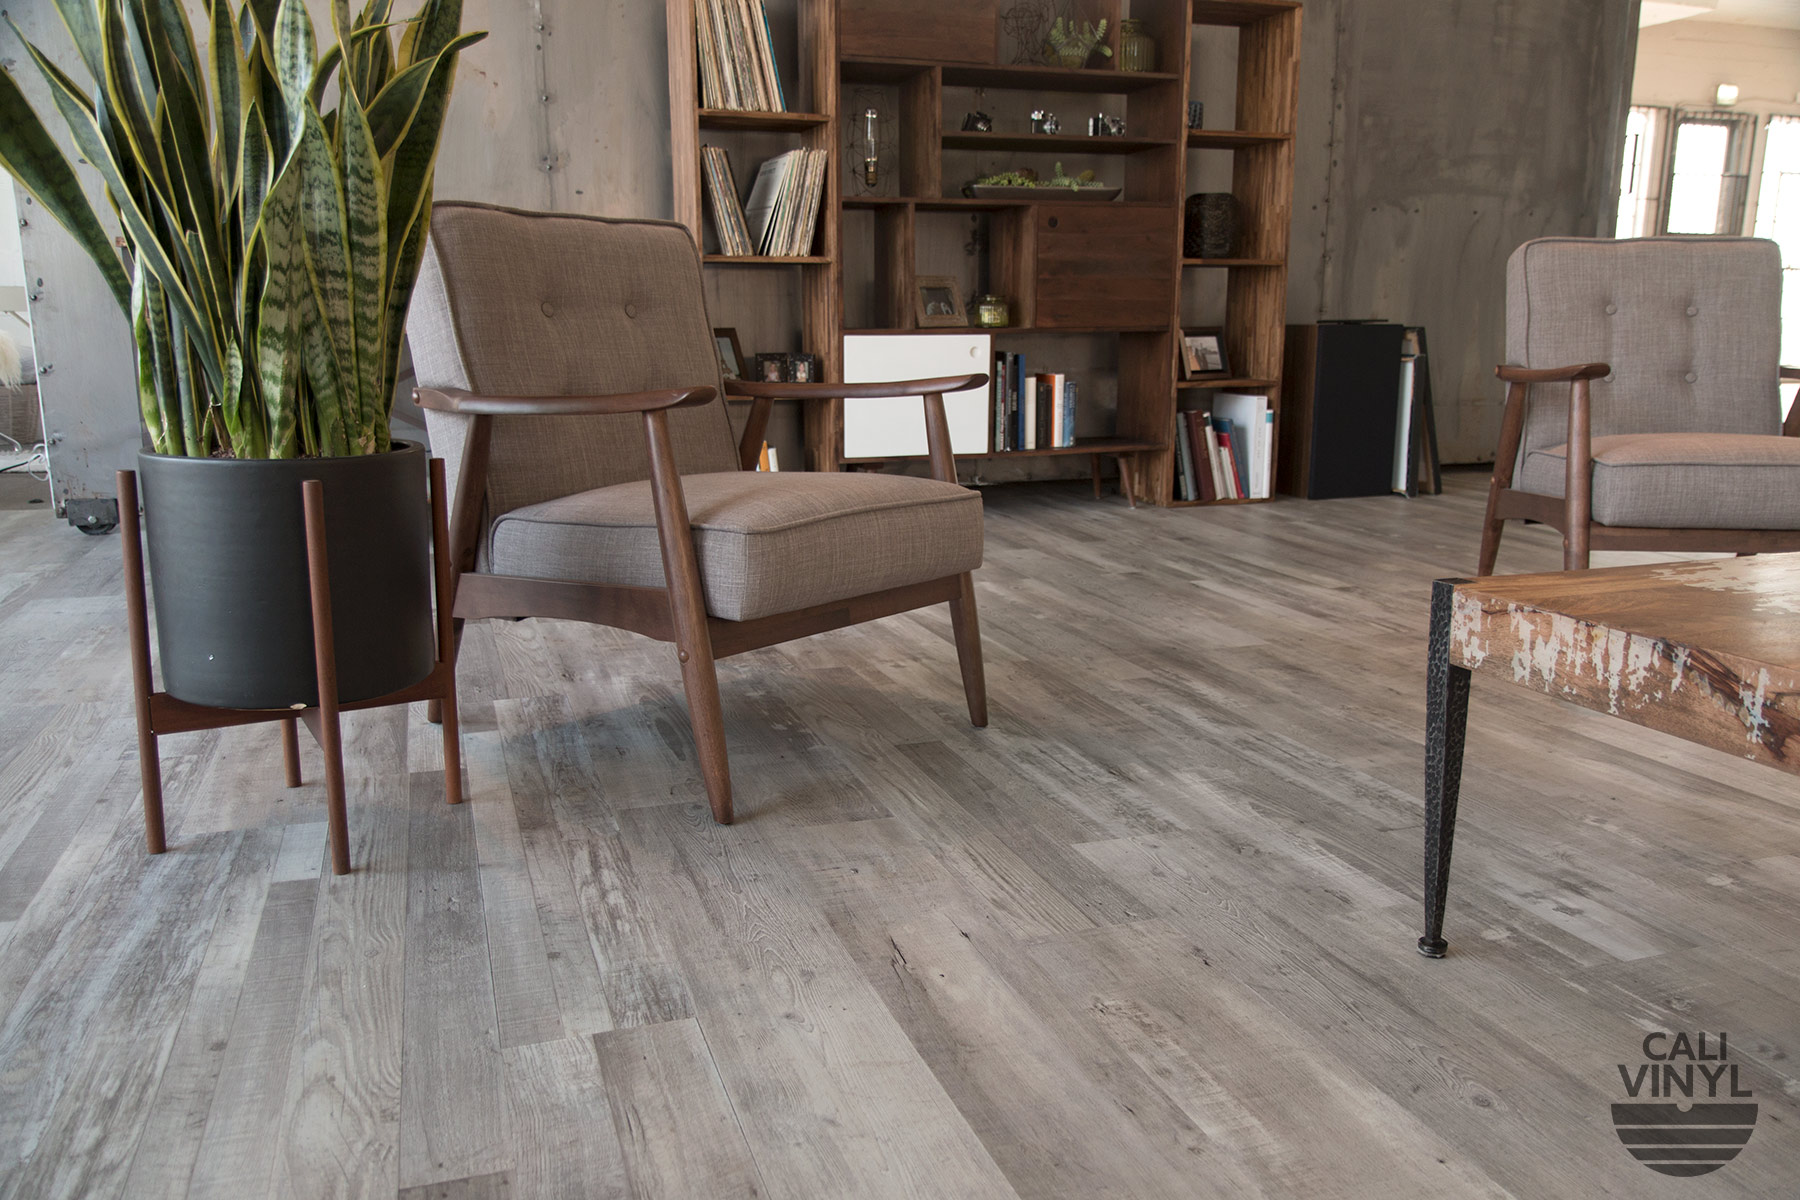 Options For Replacing Discontinued, How Do You Match Discontinued Laminate Flooring